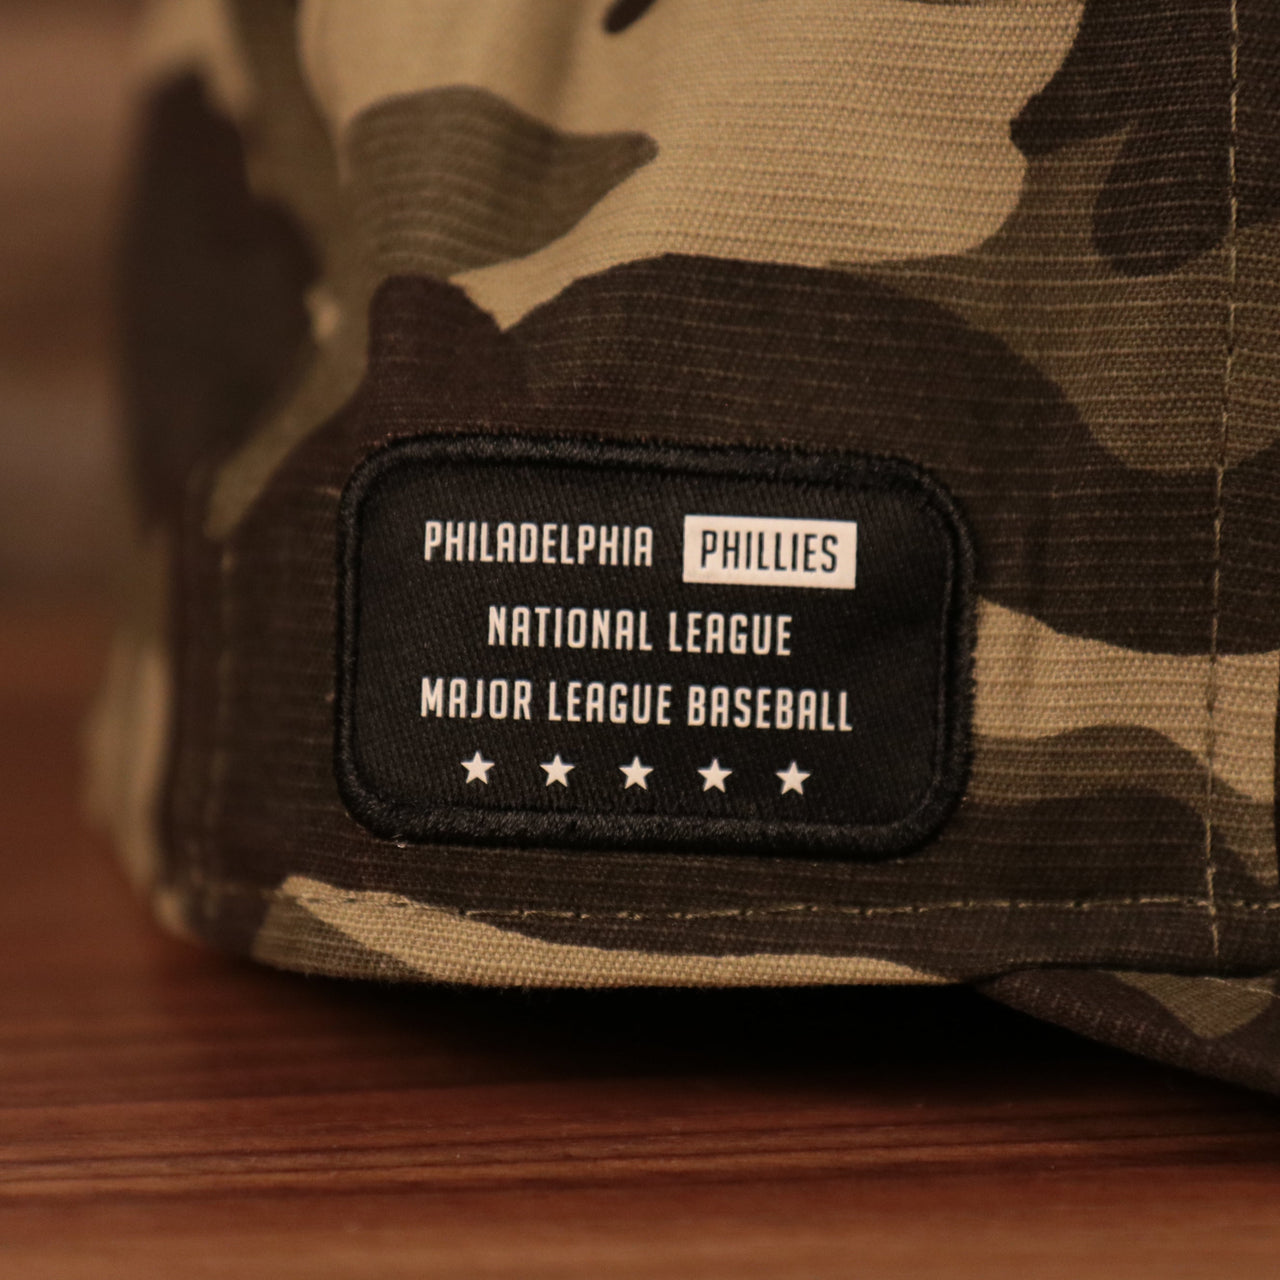 The National League patch on the right side of the 2021 Phillies military hat.